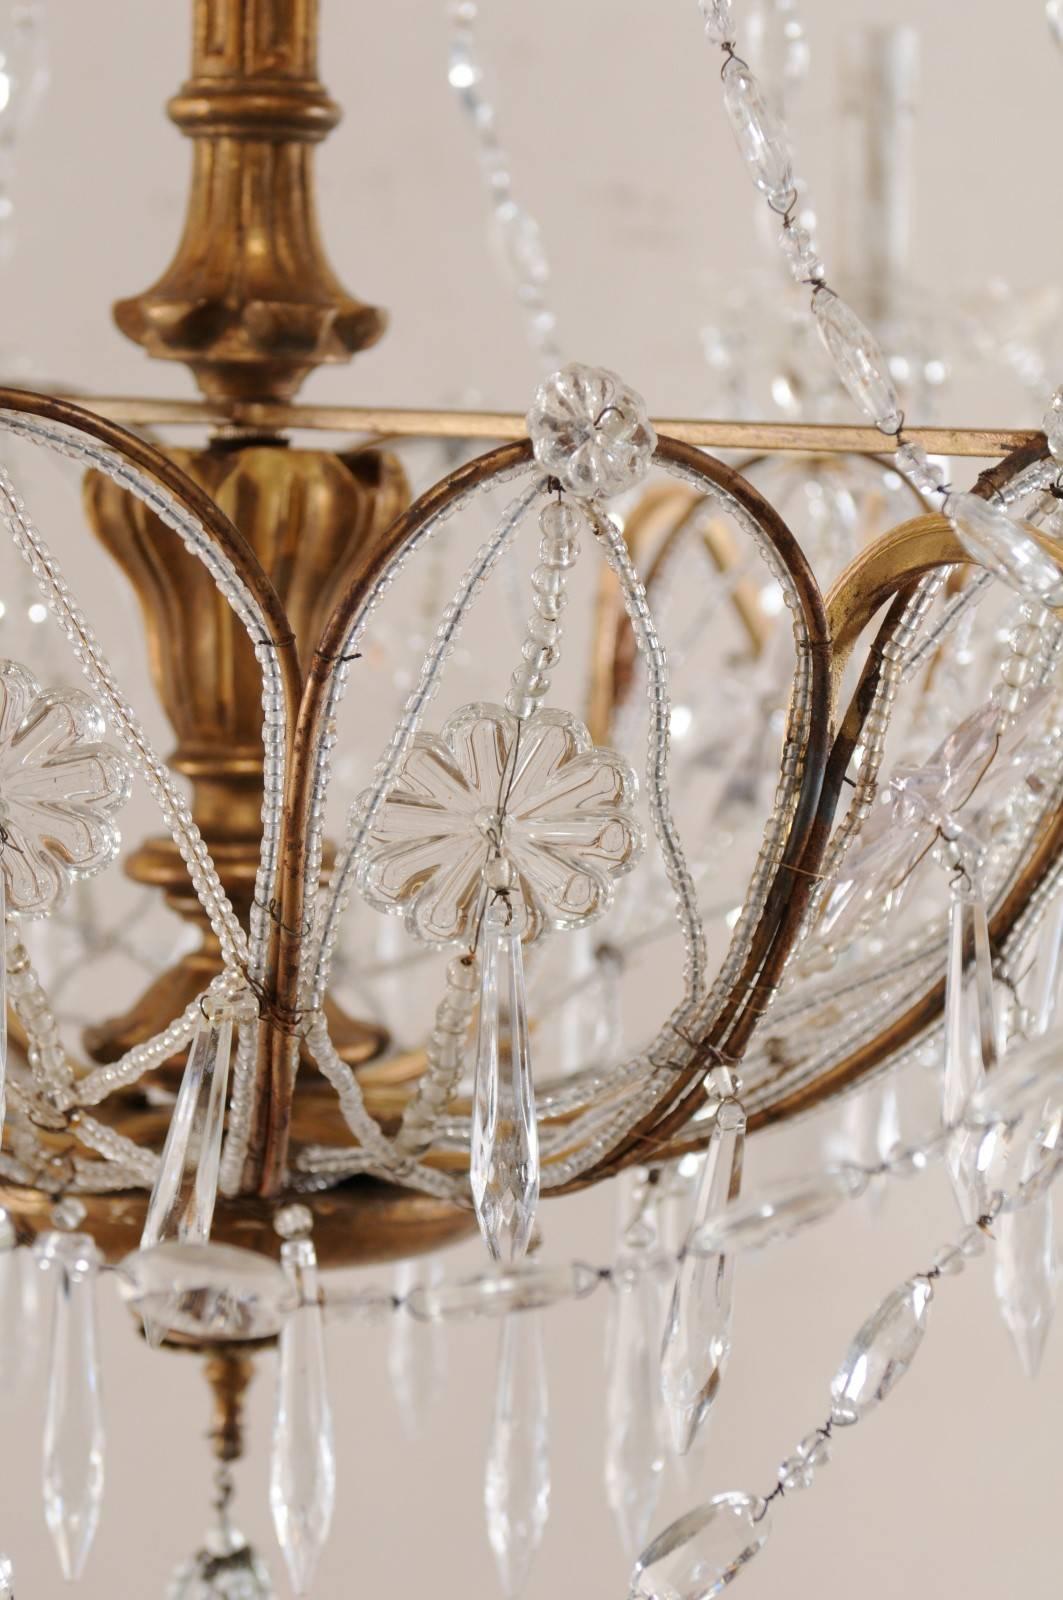 Wood Italian Basket Shaped Elegant Crystal Chandelier with Carved and Gilded Column